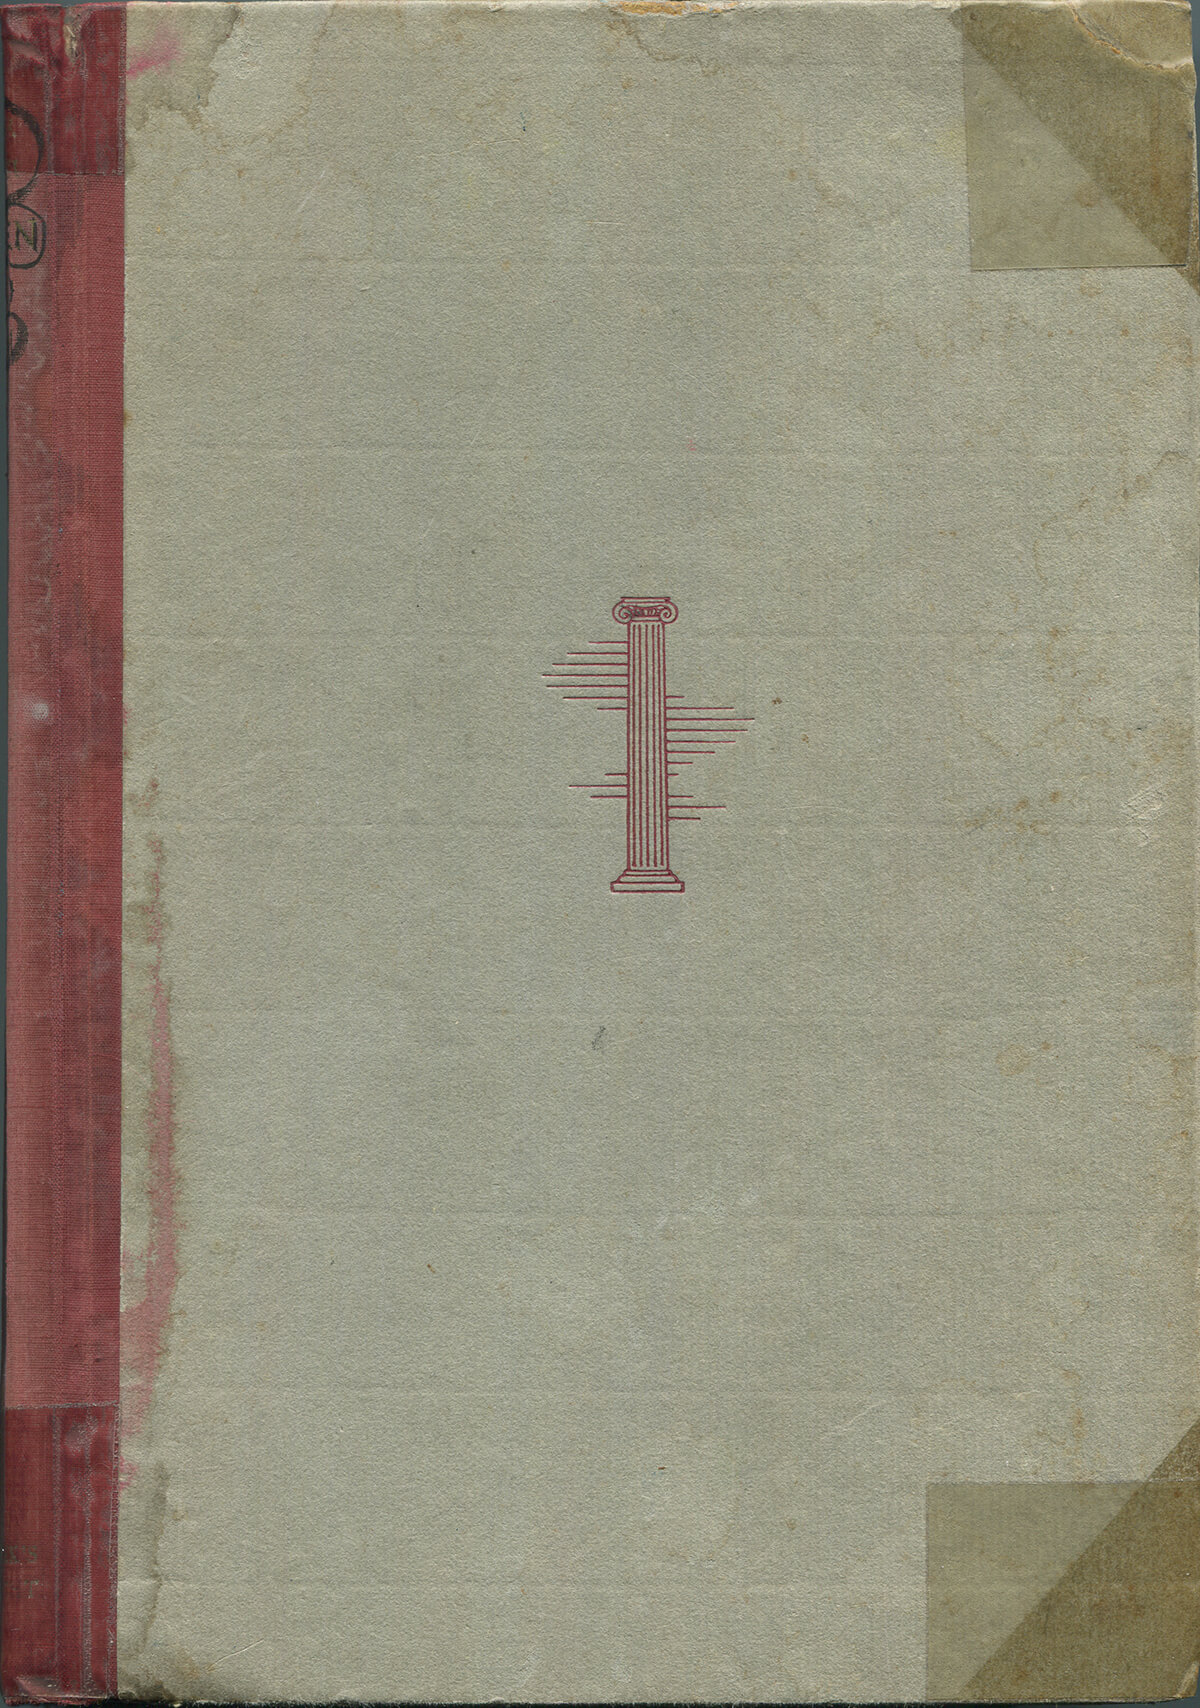 Pompeii, cover, 23.3 x 17 cm, book 265 pages, 2000